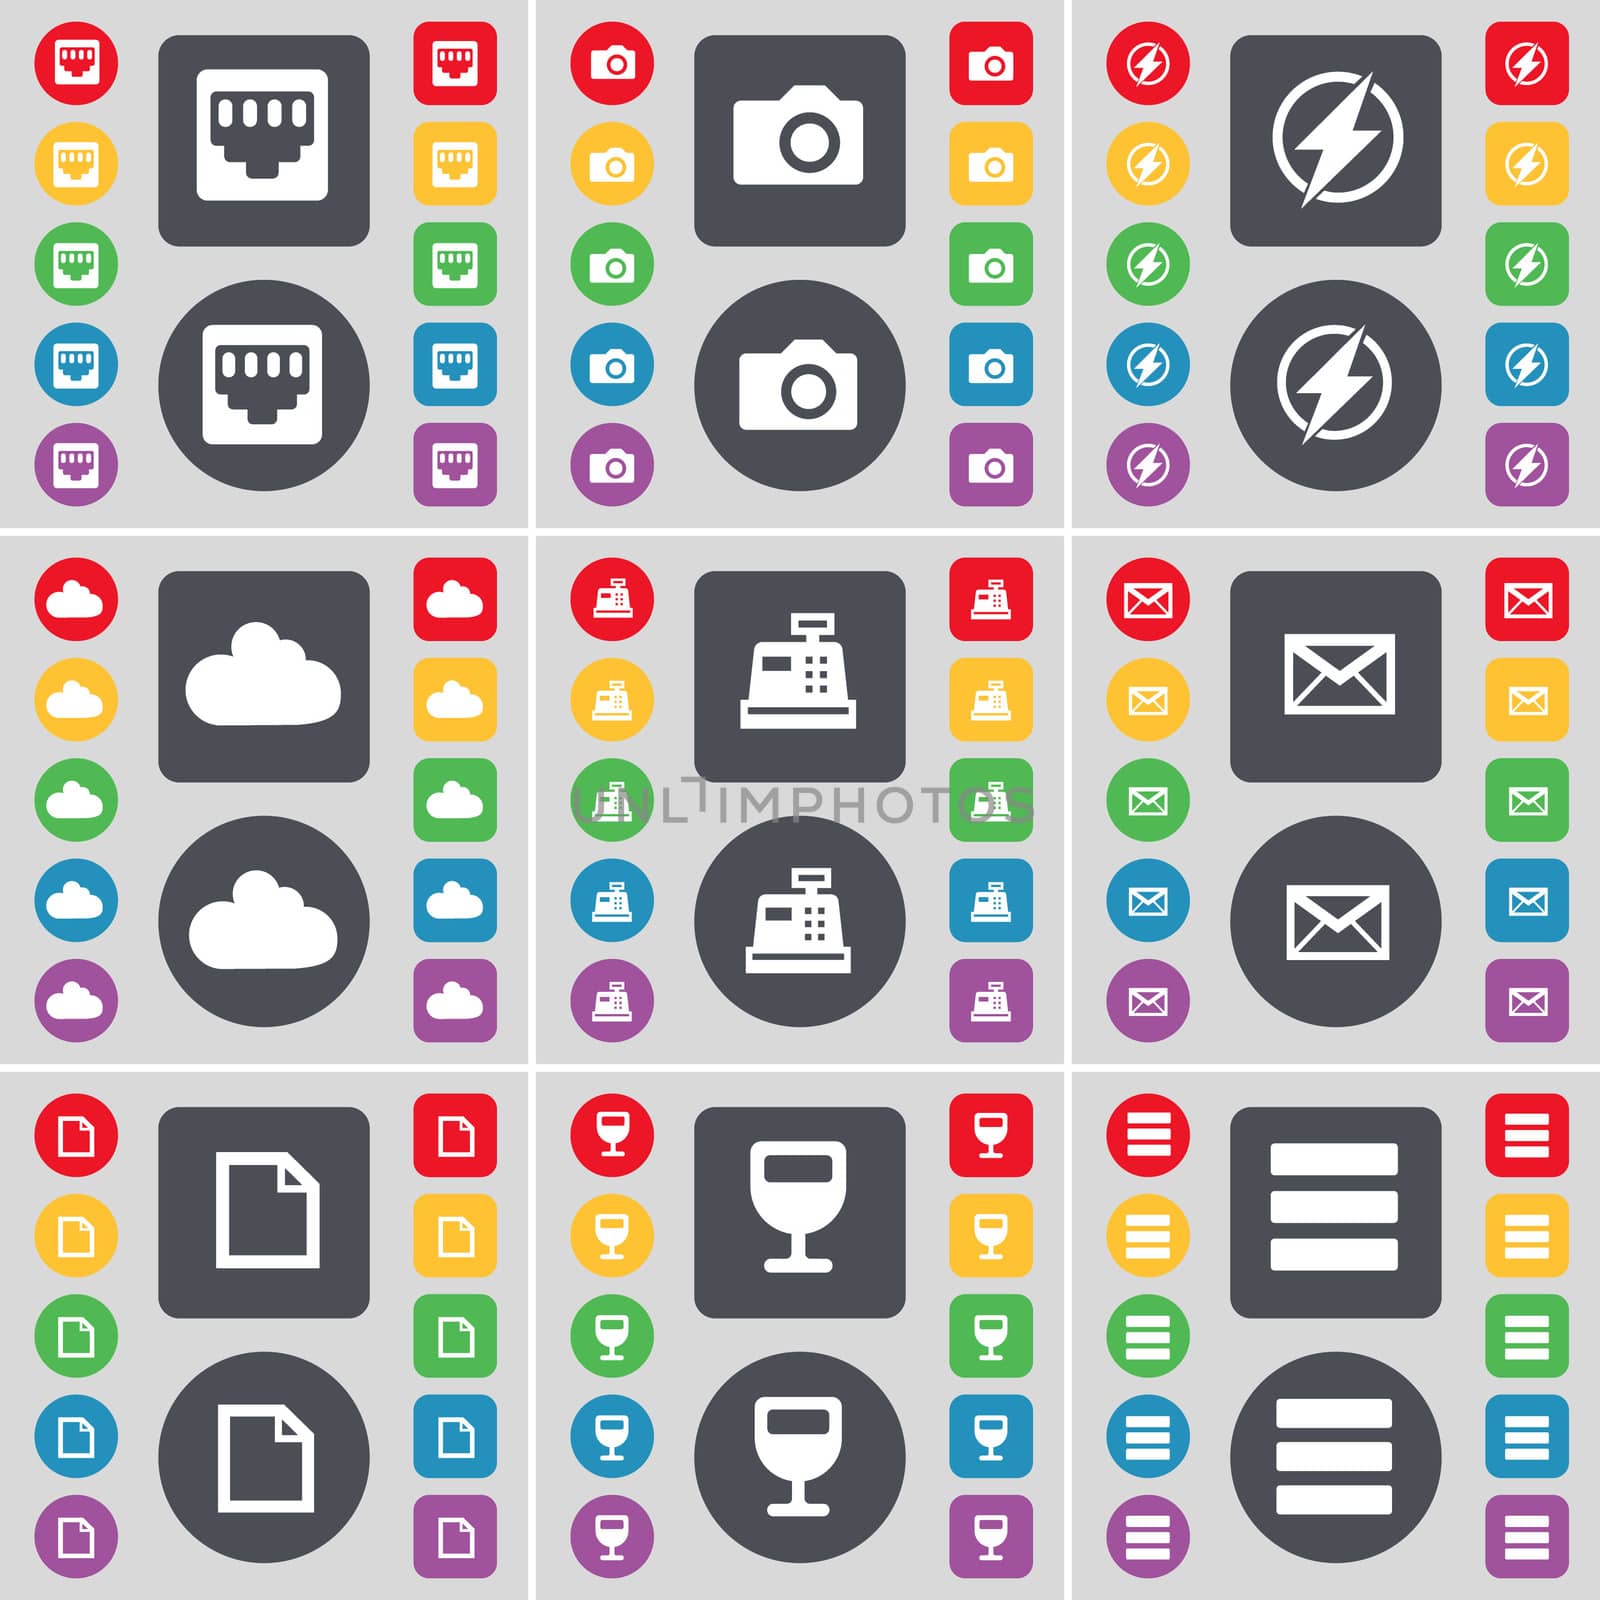 LAN socket, Camera, Flash, Cloud, Cash register, Message, Fire, Wineglass, Apps icon symbol. A large set of flat, colored buttons for your design. illustration